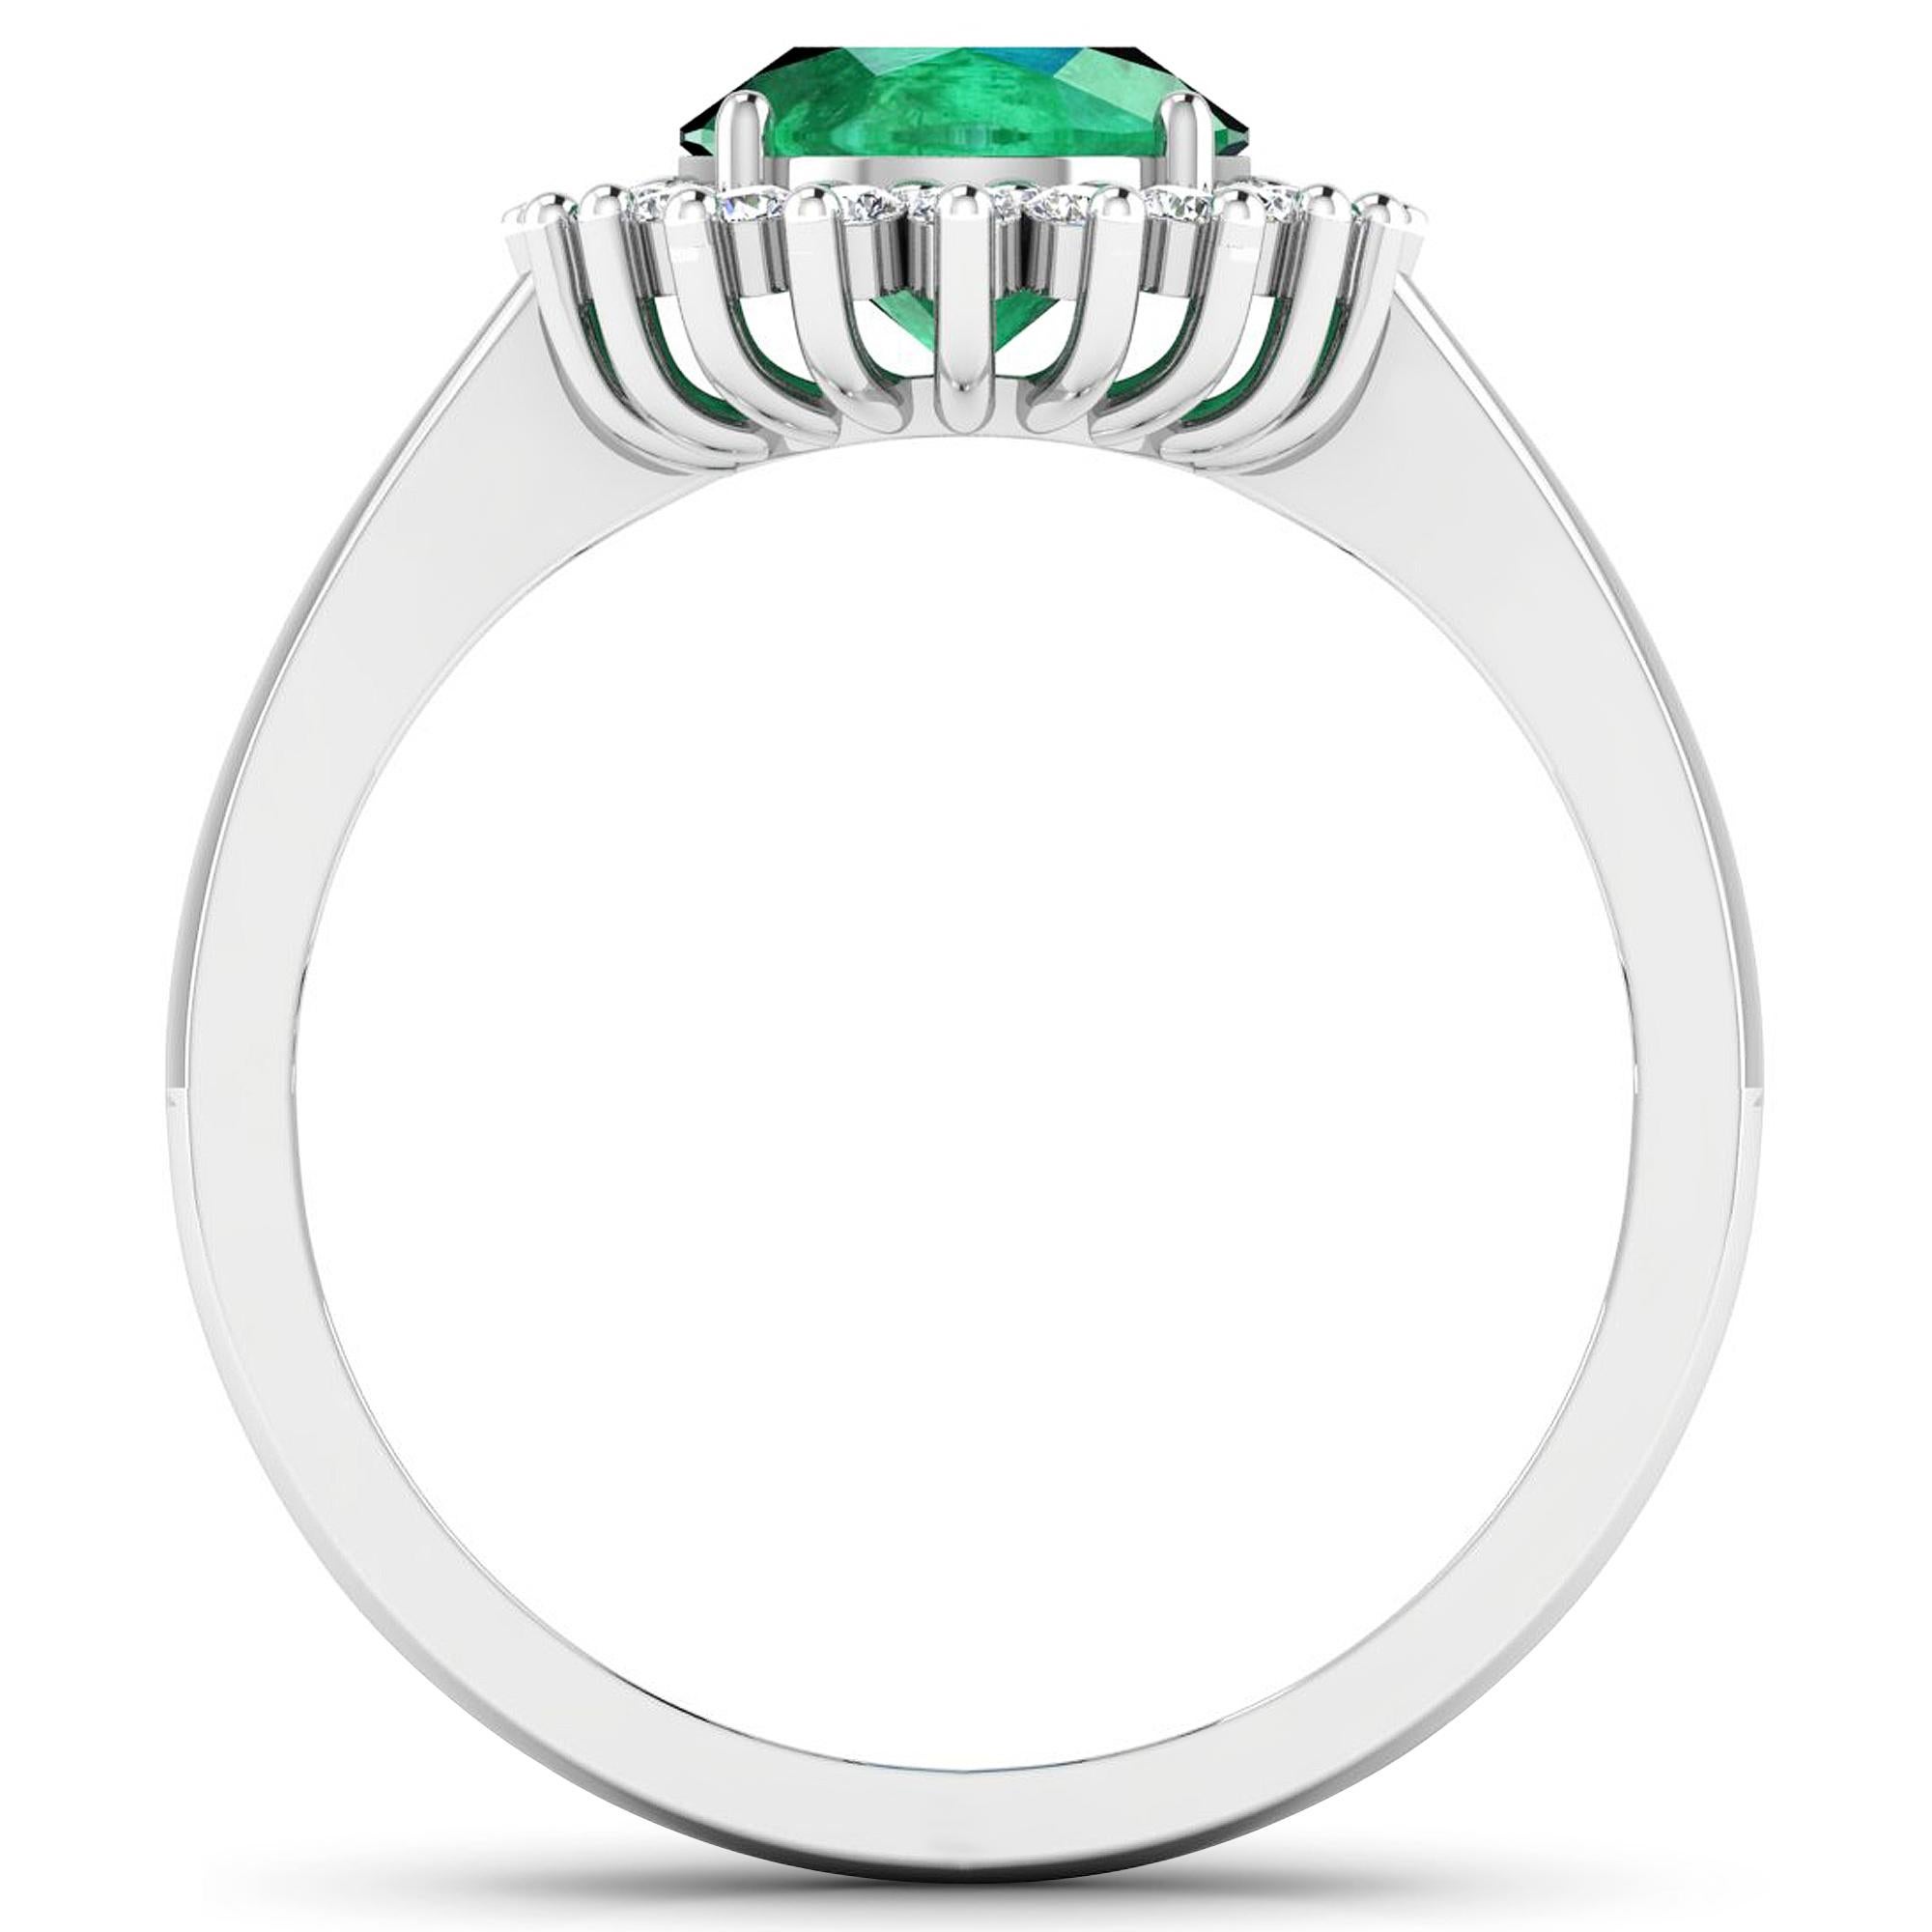 Emerald Gold Ring, 14Kt Gold Emerald & Diamond Engagement Ring, 1.29ctw.

Flaunt yourself with this 14K White Gold Emerald & White Diamond Engagement Ring. The setting is inlaid with 17 accented full-cut White Diamond round stones for a total stone